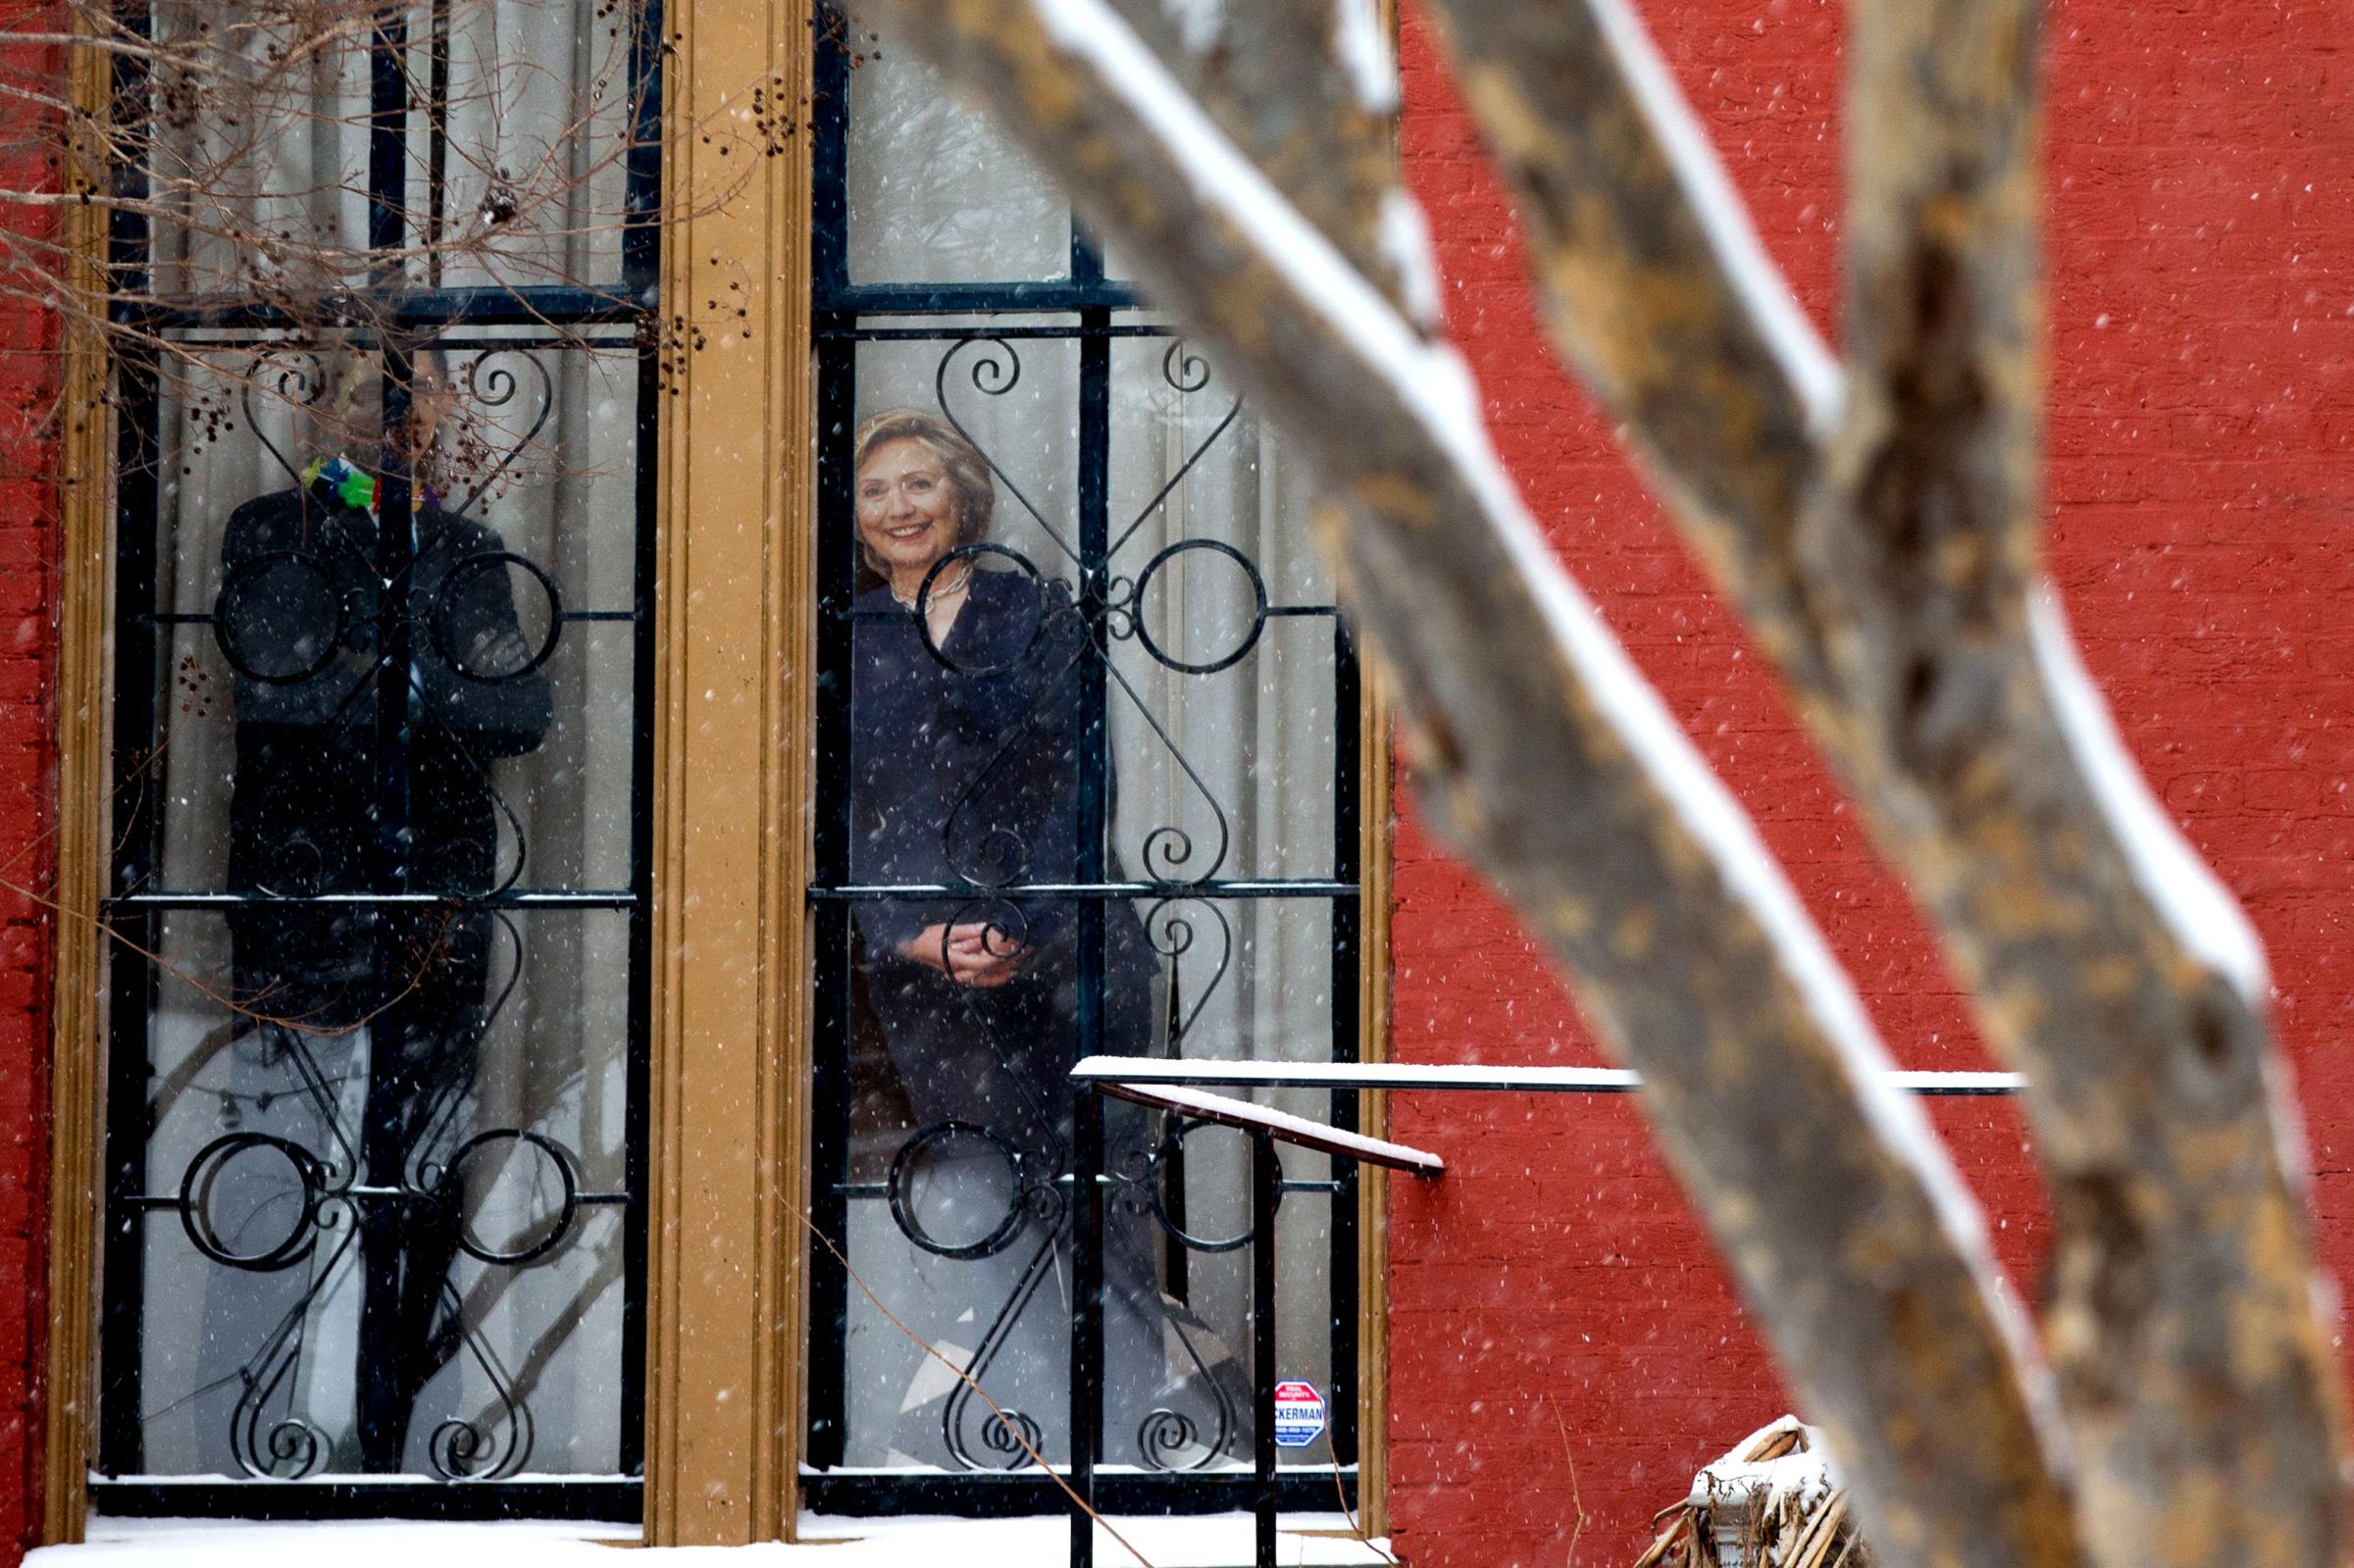 Cardboard cutouts of Democratic presidential candidate Hillary Clinton , right, and President Barack Obama are positioned in a window in the LeDroit Park neighborhood in Washington on Feb. 15, 2016.